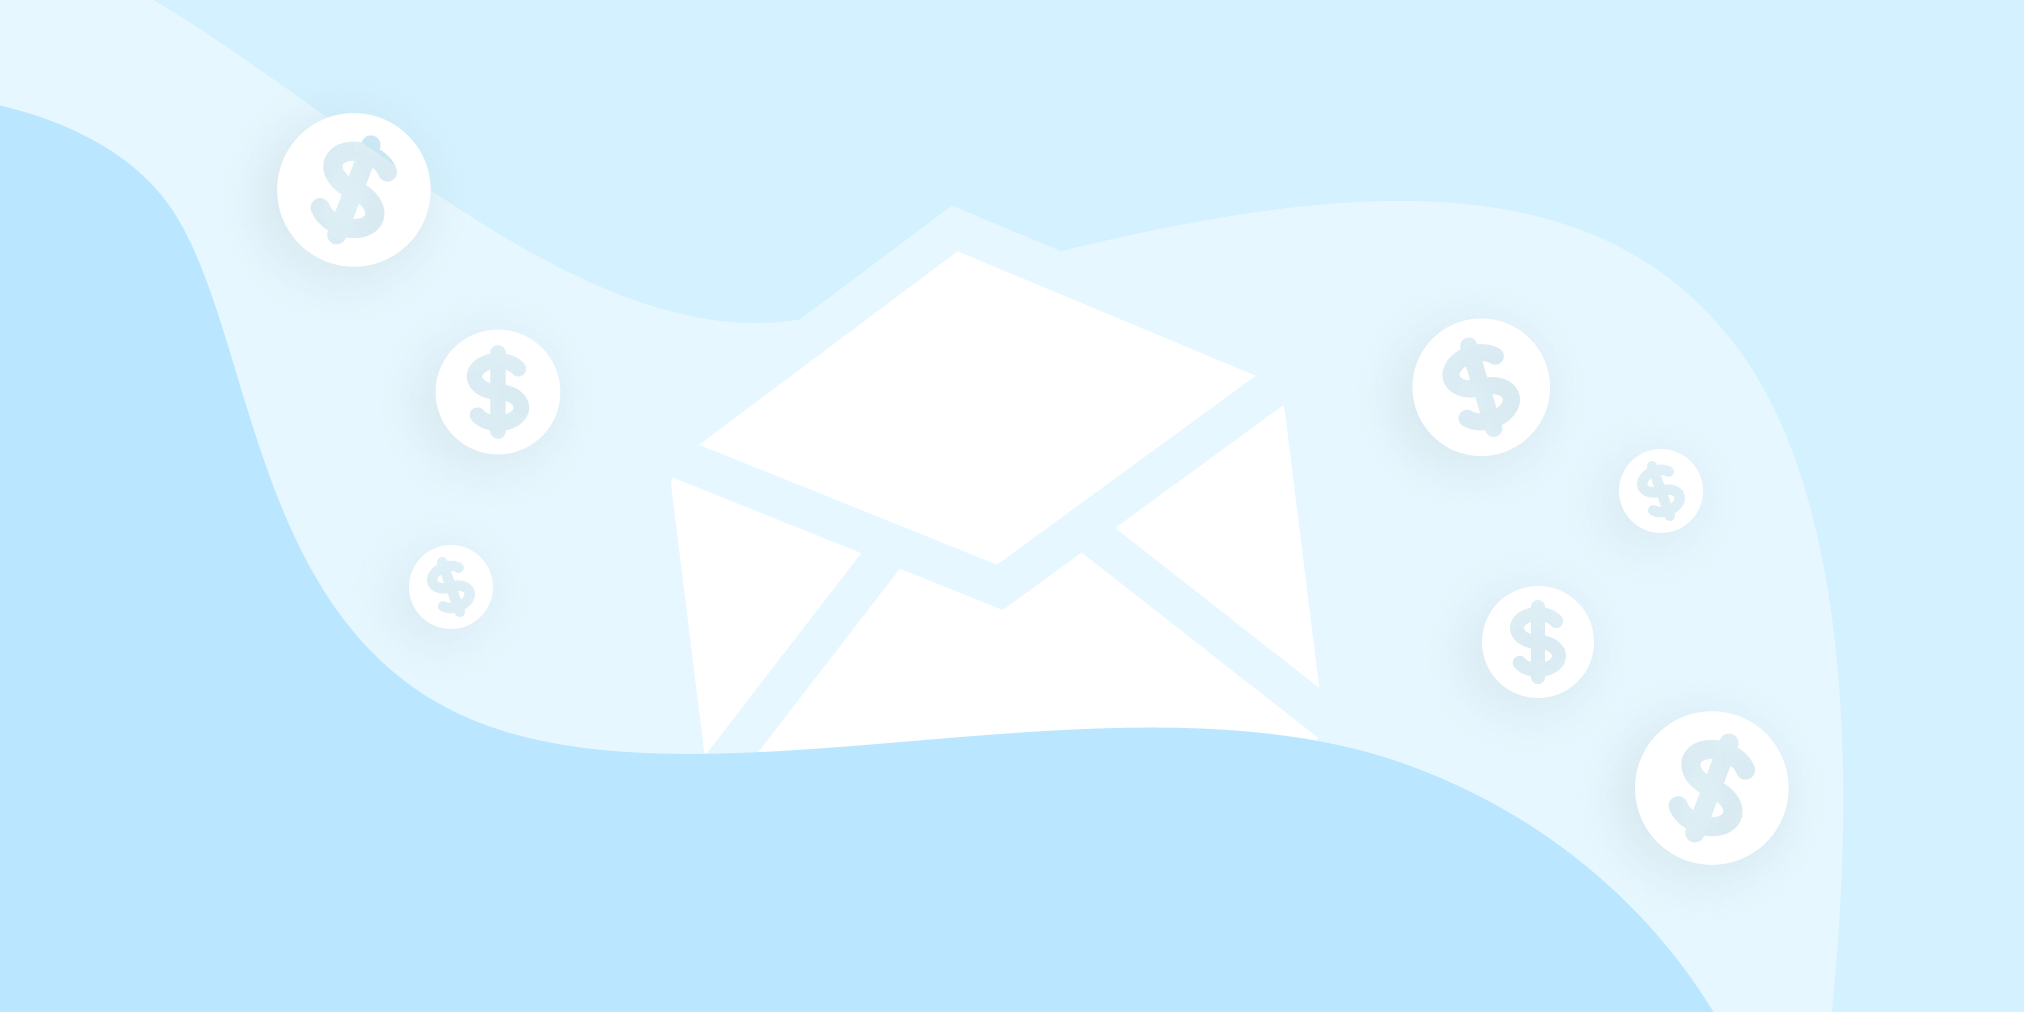 Email Affiliate Marketing: How To Use Emails To Boost Your Affiliate Revenue